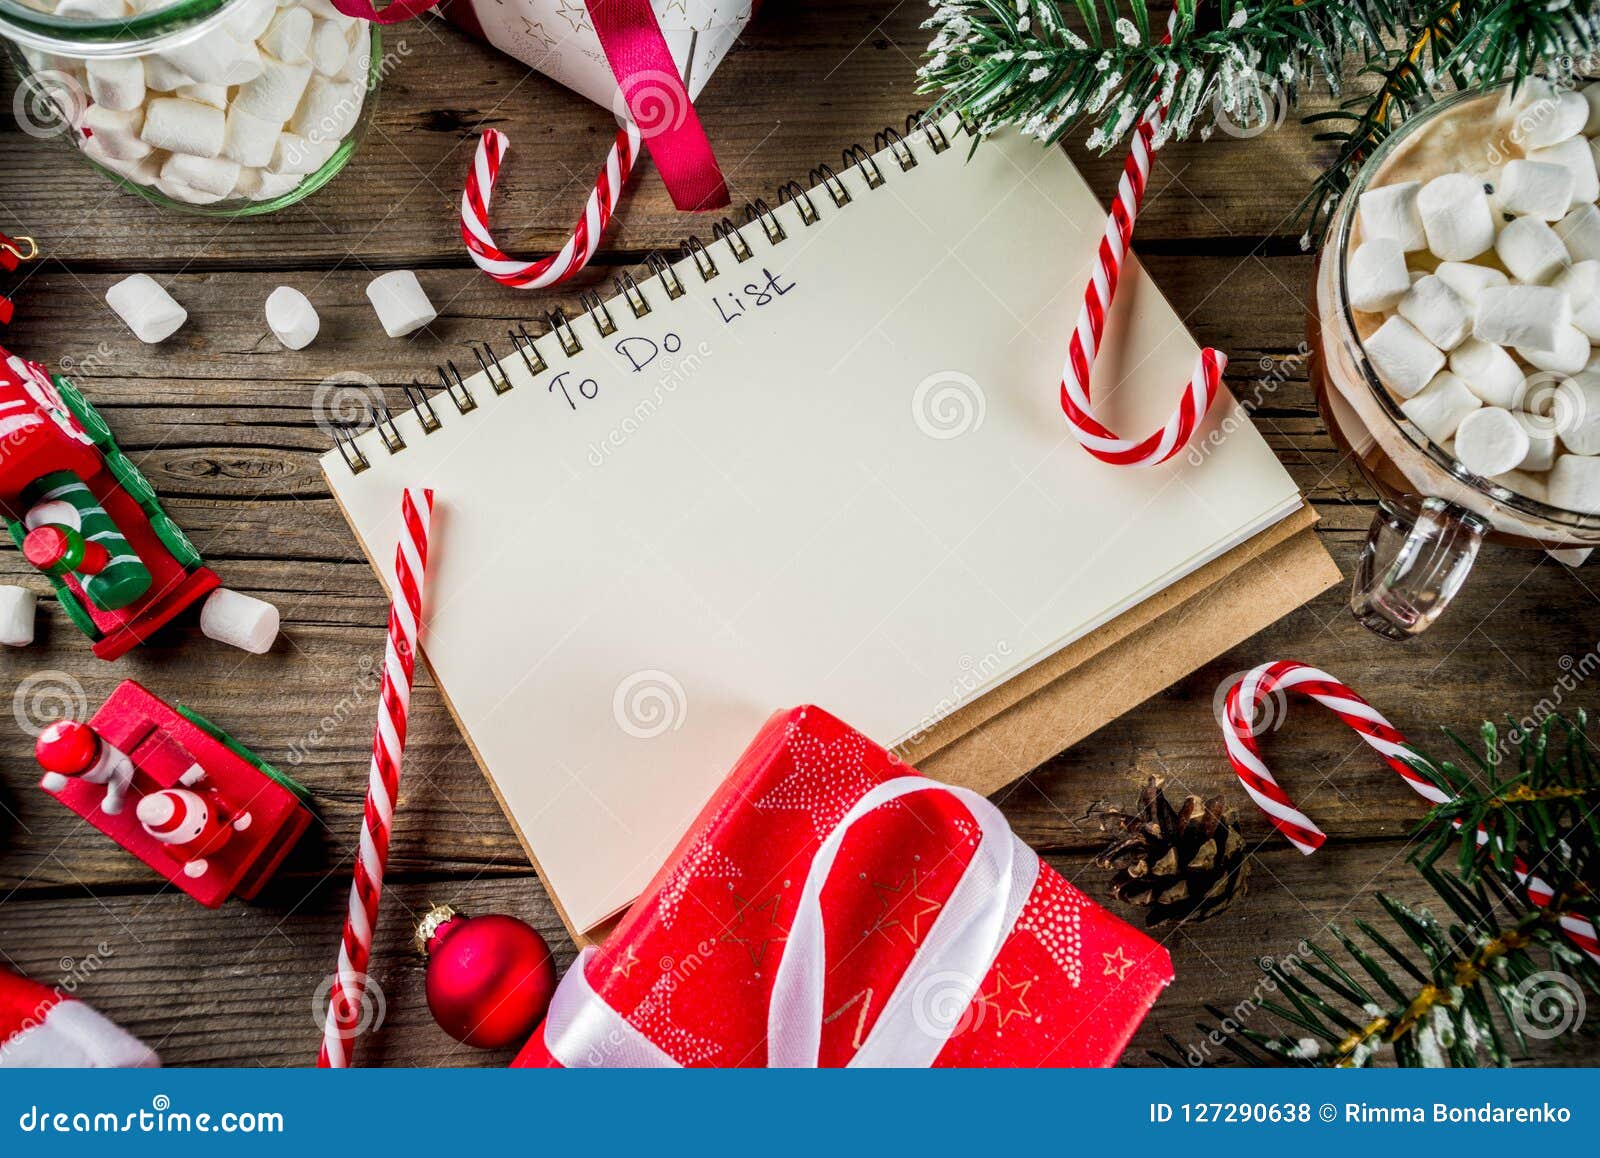 preparation-for-xmas-holidays-stock-photo-image-of-card-claus-127290638